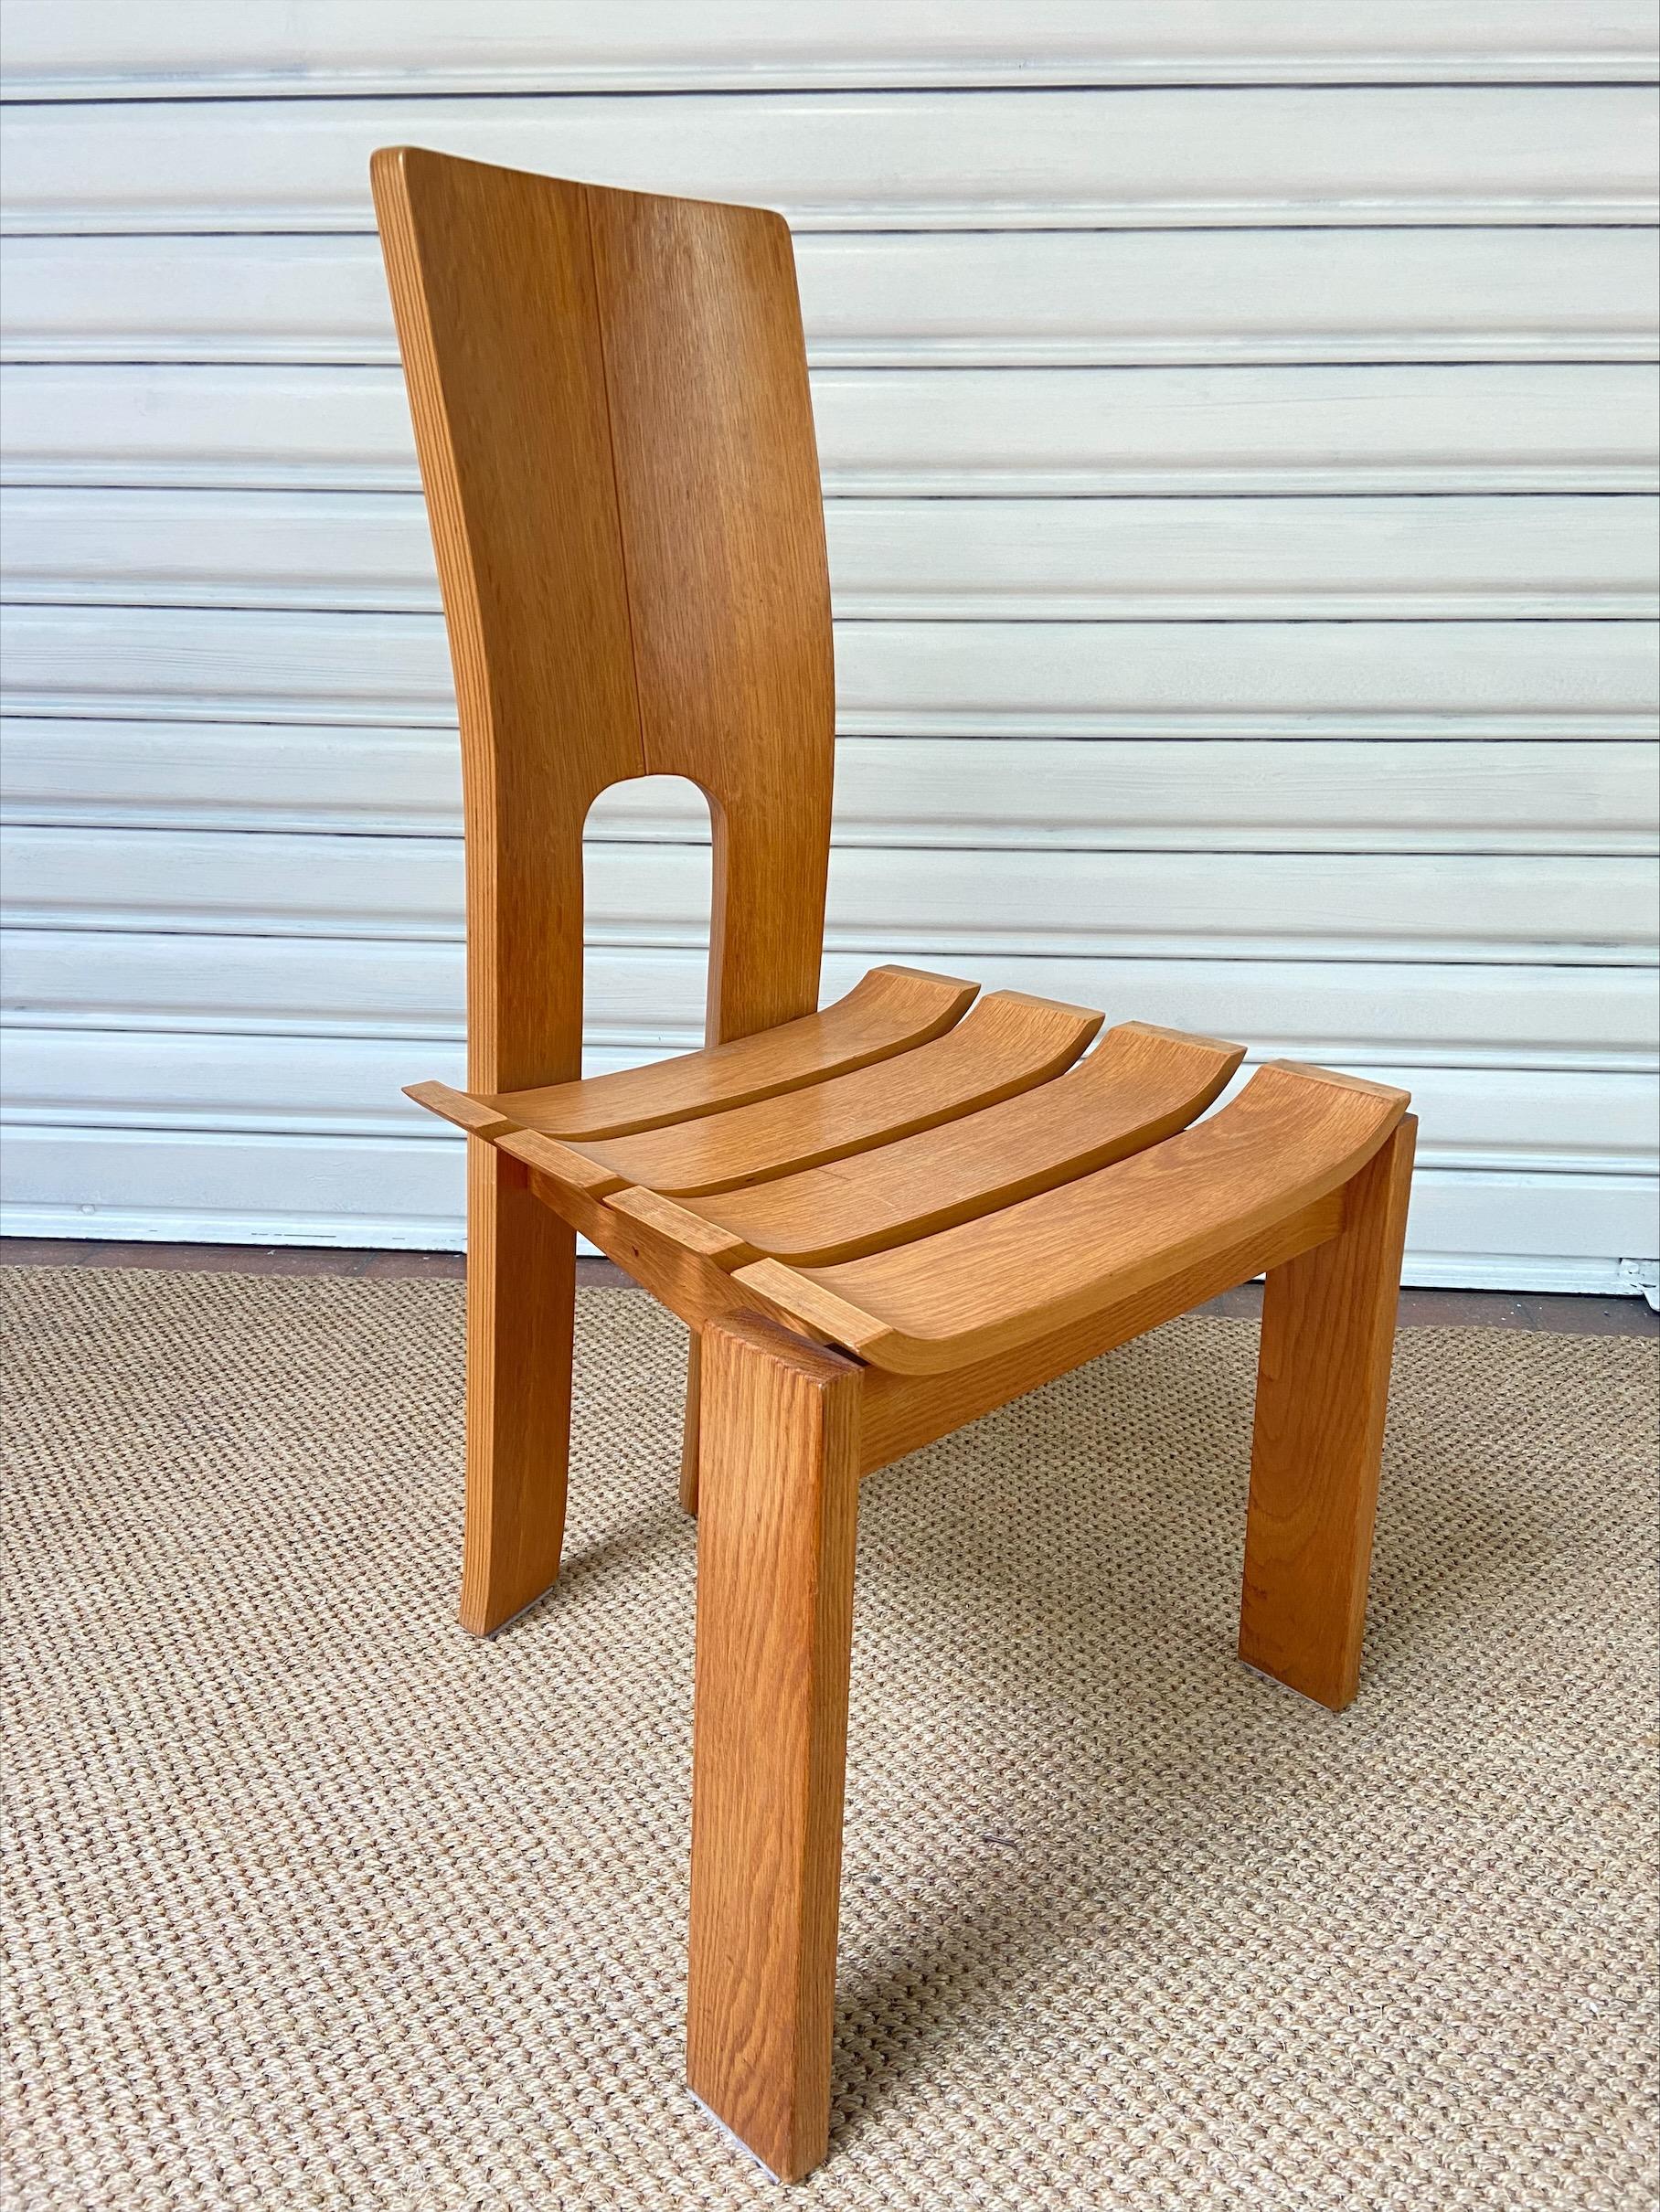 4 chairs - Scandinavian design
solid elm
Circa 1970
Measures: W49 x D47 x H96 cm
Seat height: 45 cm
Like a postmodern version of an alvar aalto chair. The arched back and seats are a stunning feature.